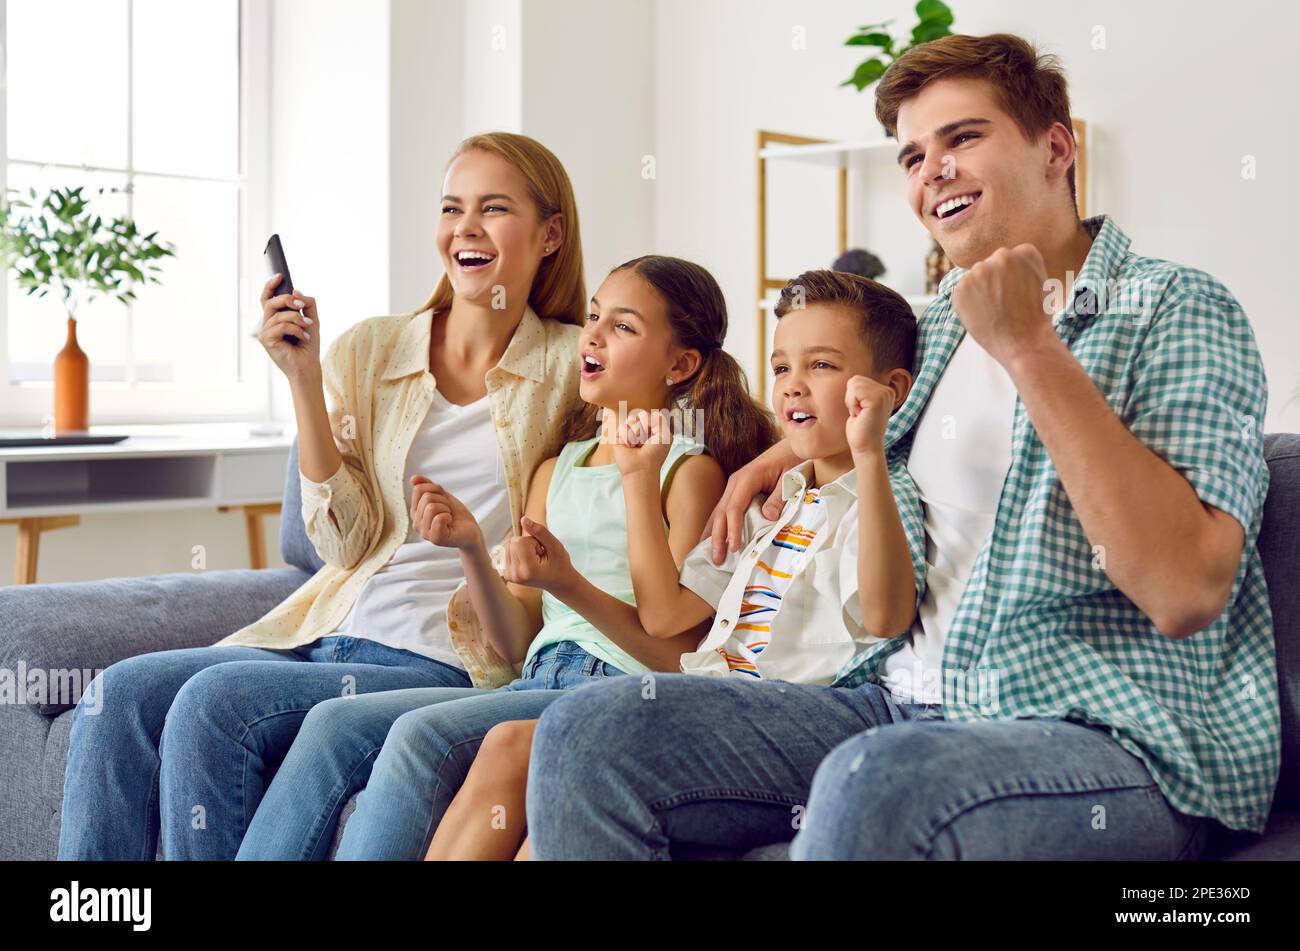 Cheerful family with children cheering together while watching TV at home in living room. Stock Photo